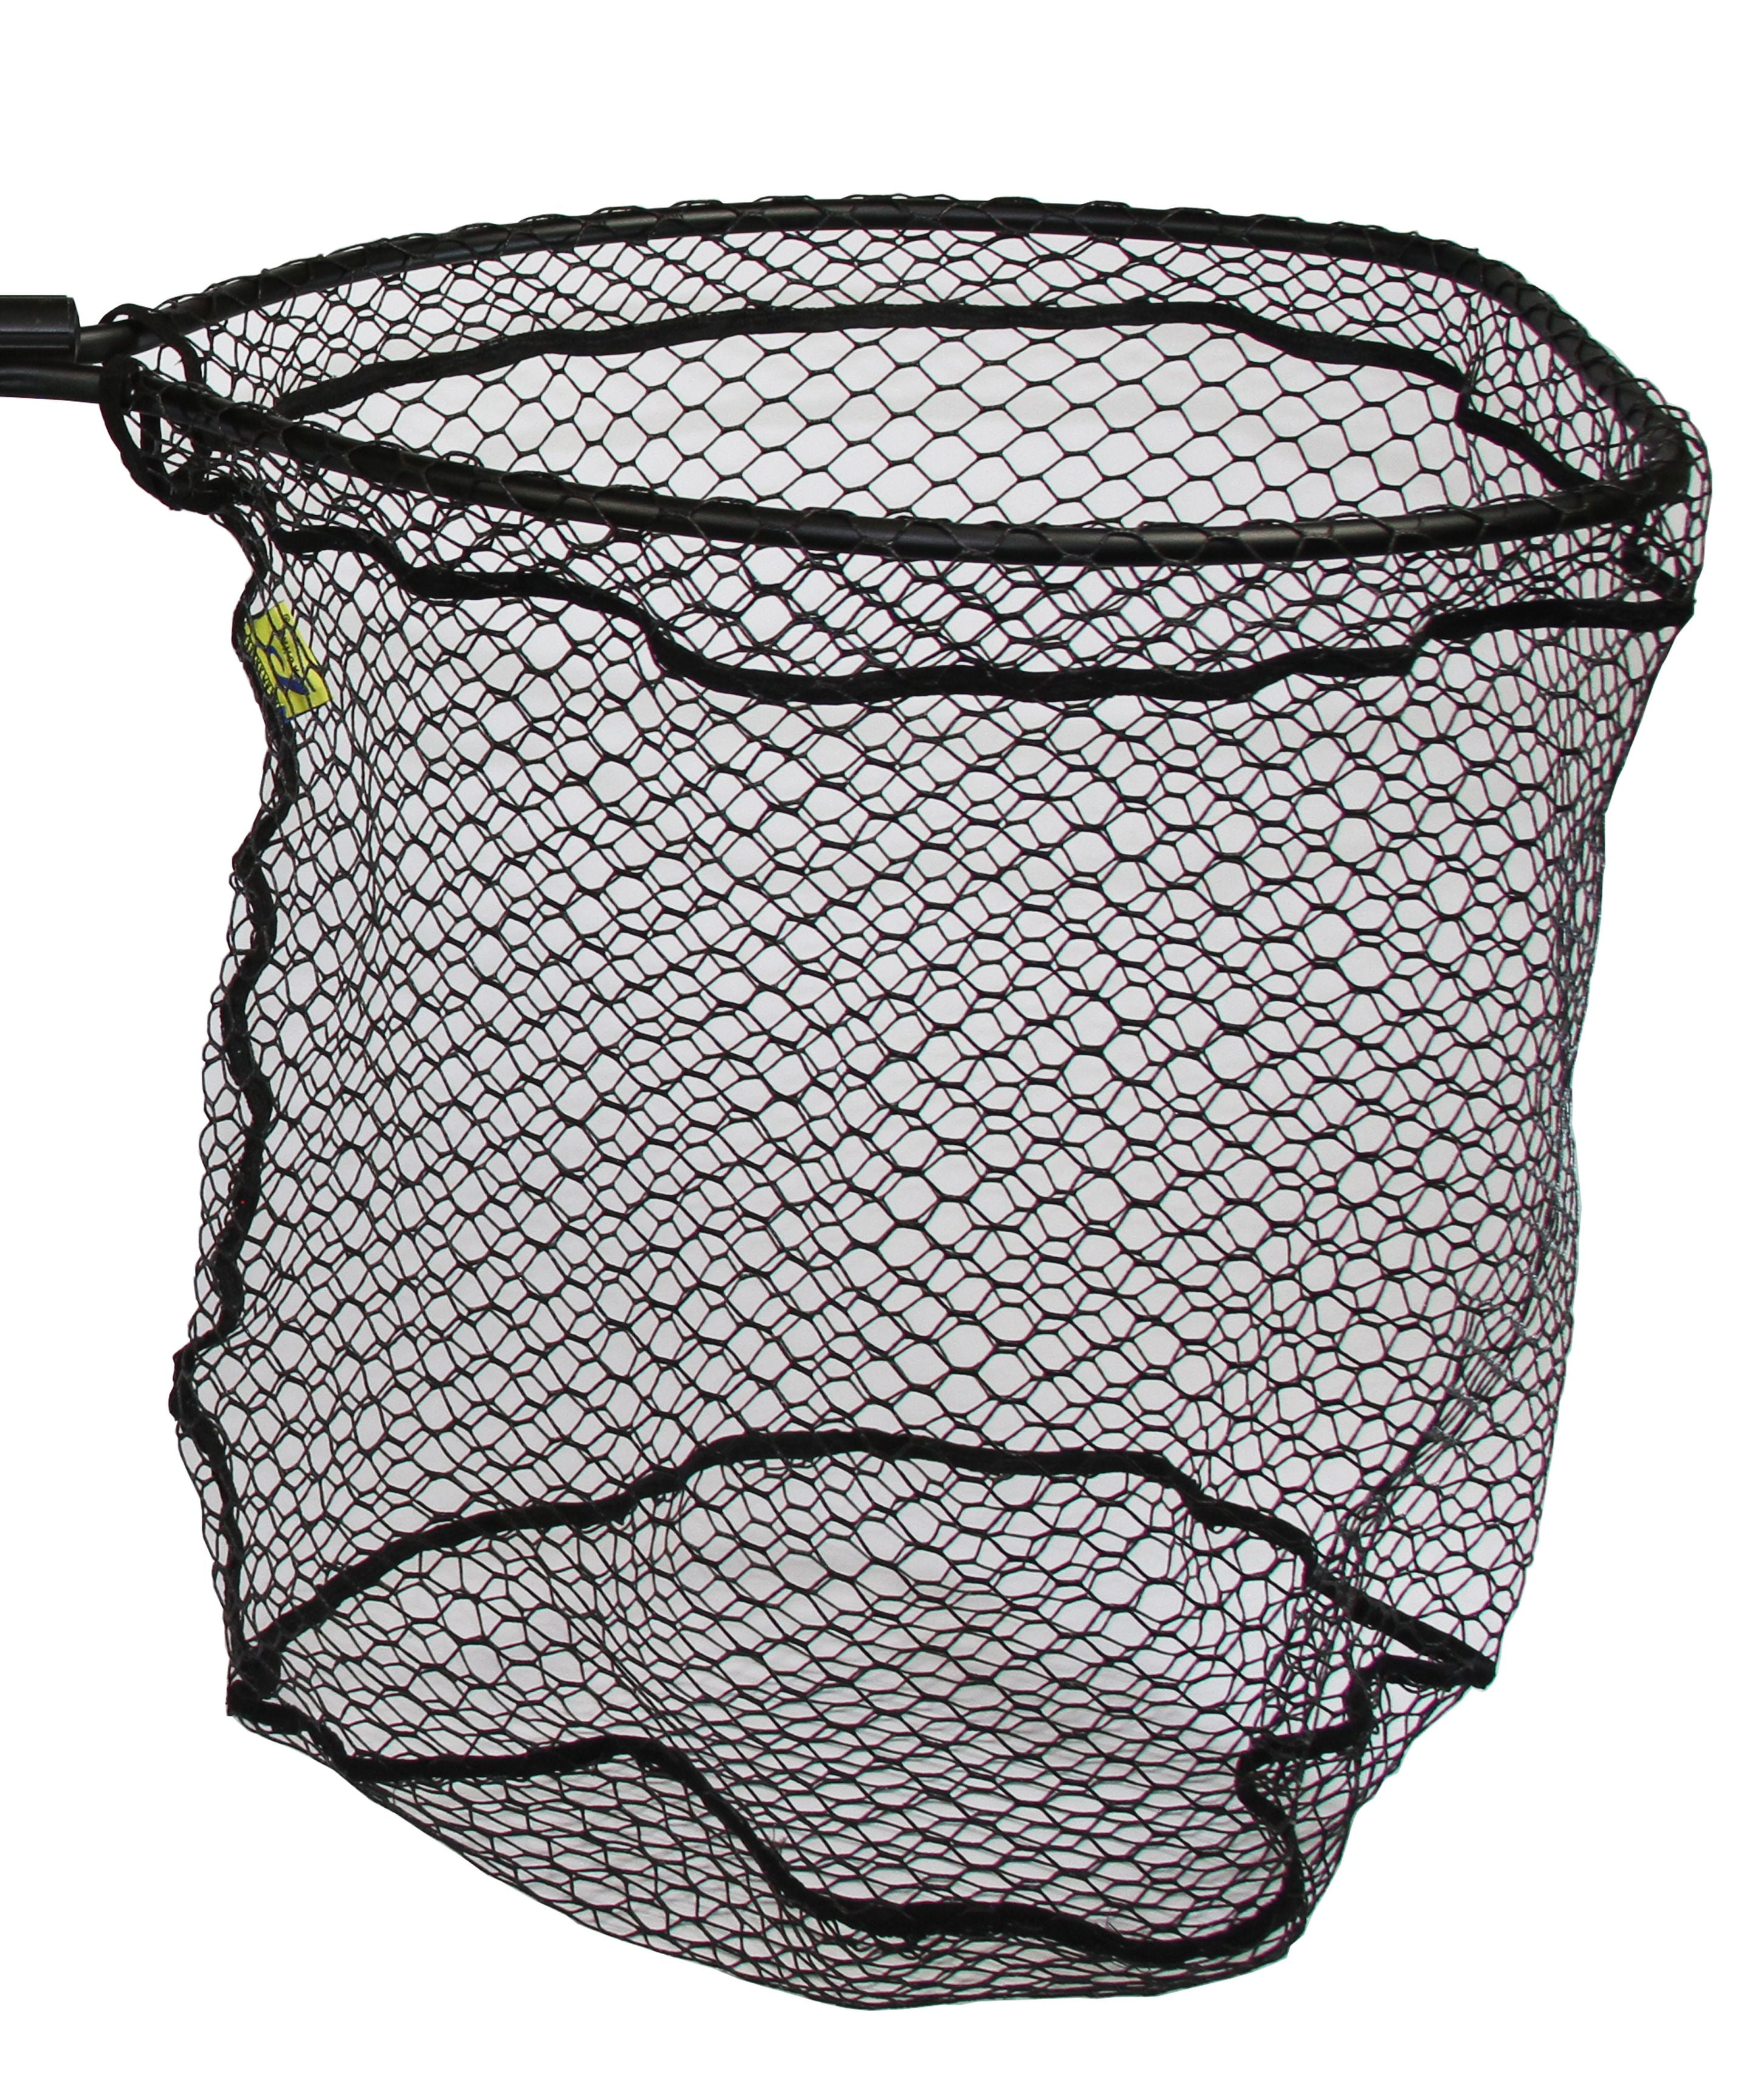 frabill tangle free rubber replacement net, 20 x 23-inch - Walmart.com